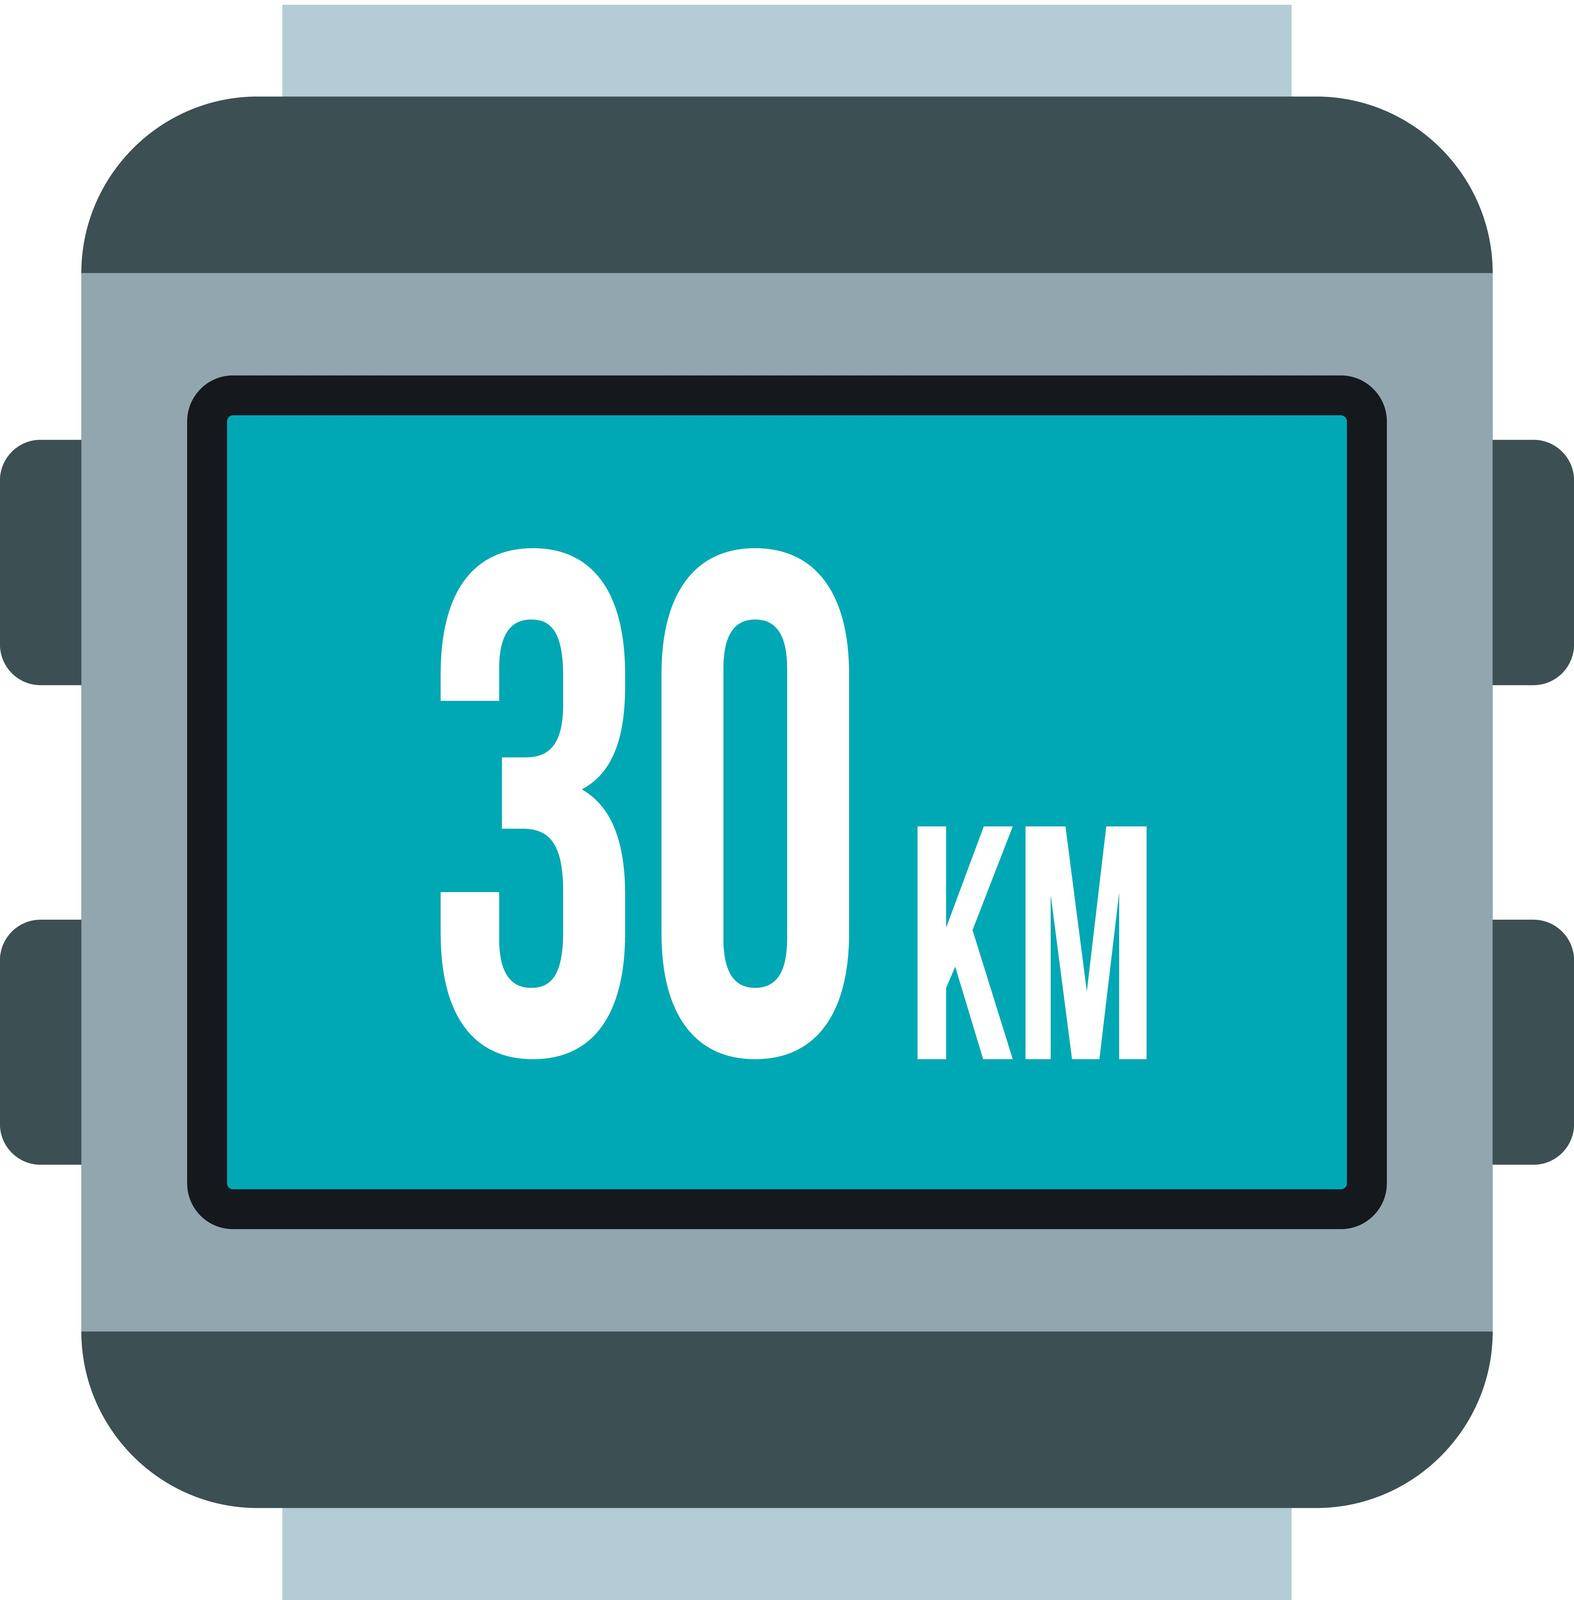 Speedometer for bike icon, flat style by ylivdesign